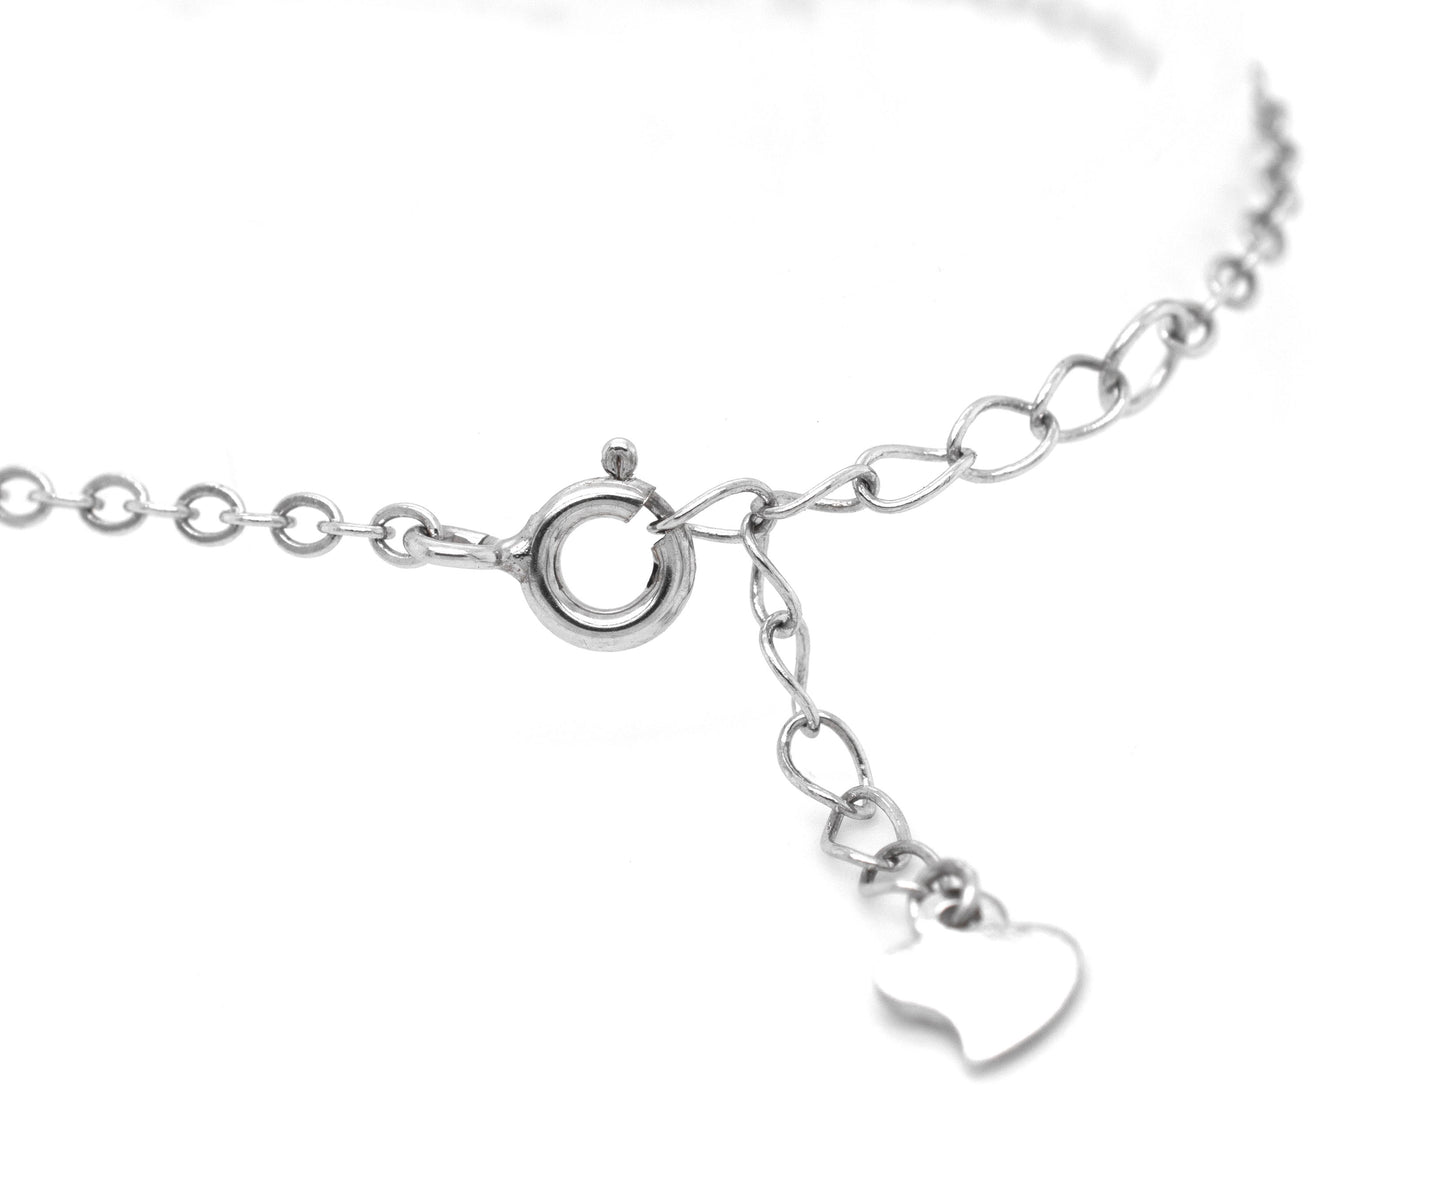 A minimalist Super Silver Protective Cubic Zirconia Evil Eye Bracelet with a heart charm.